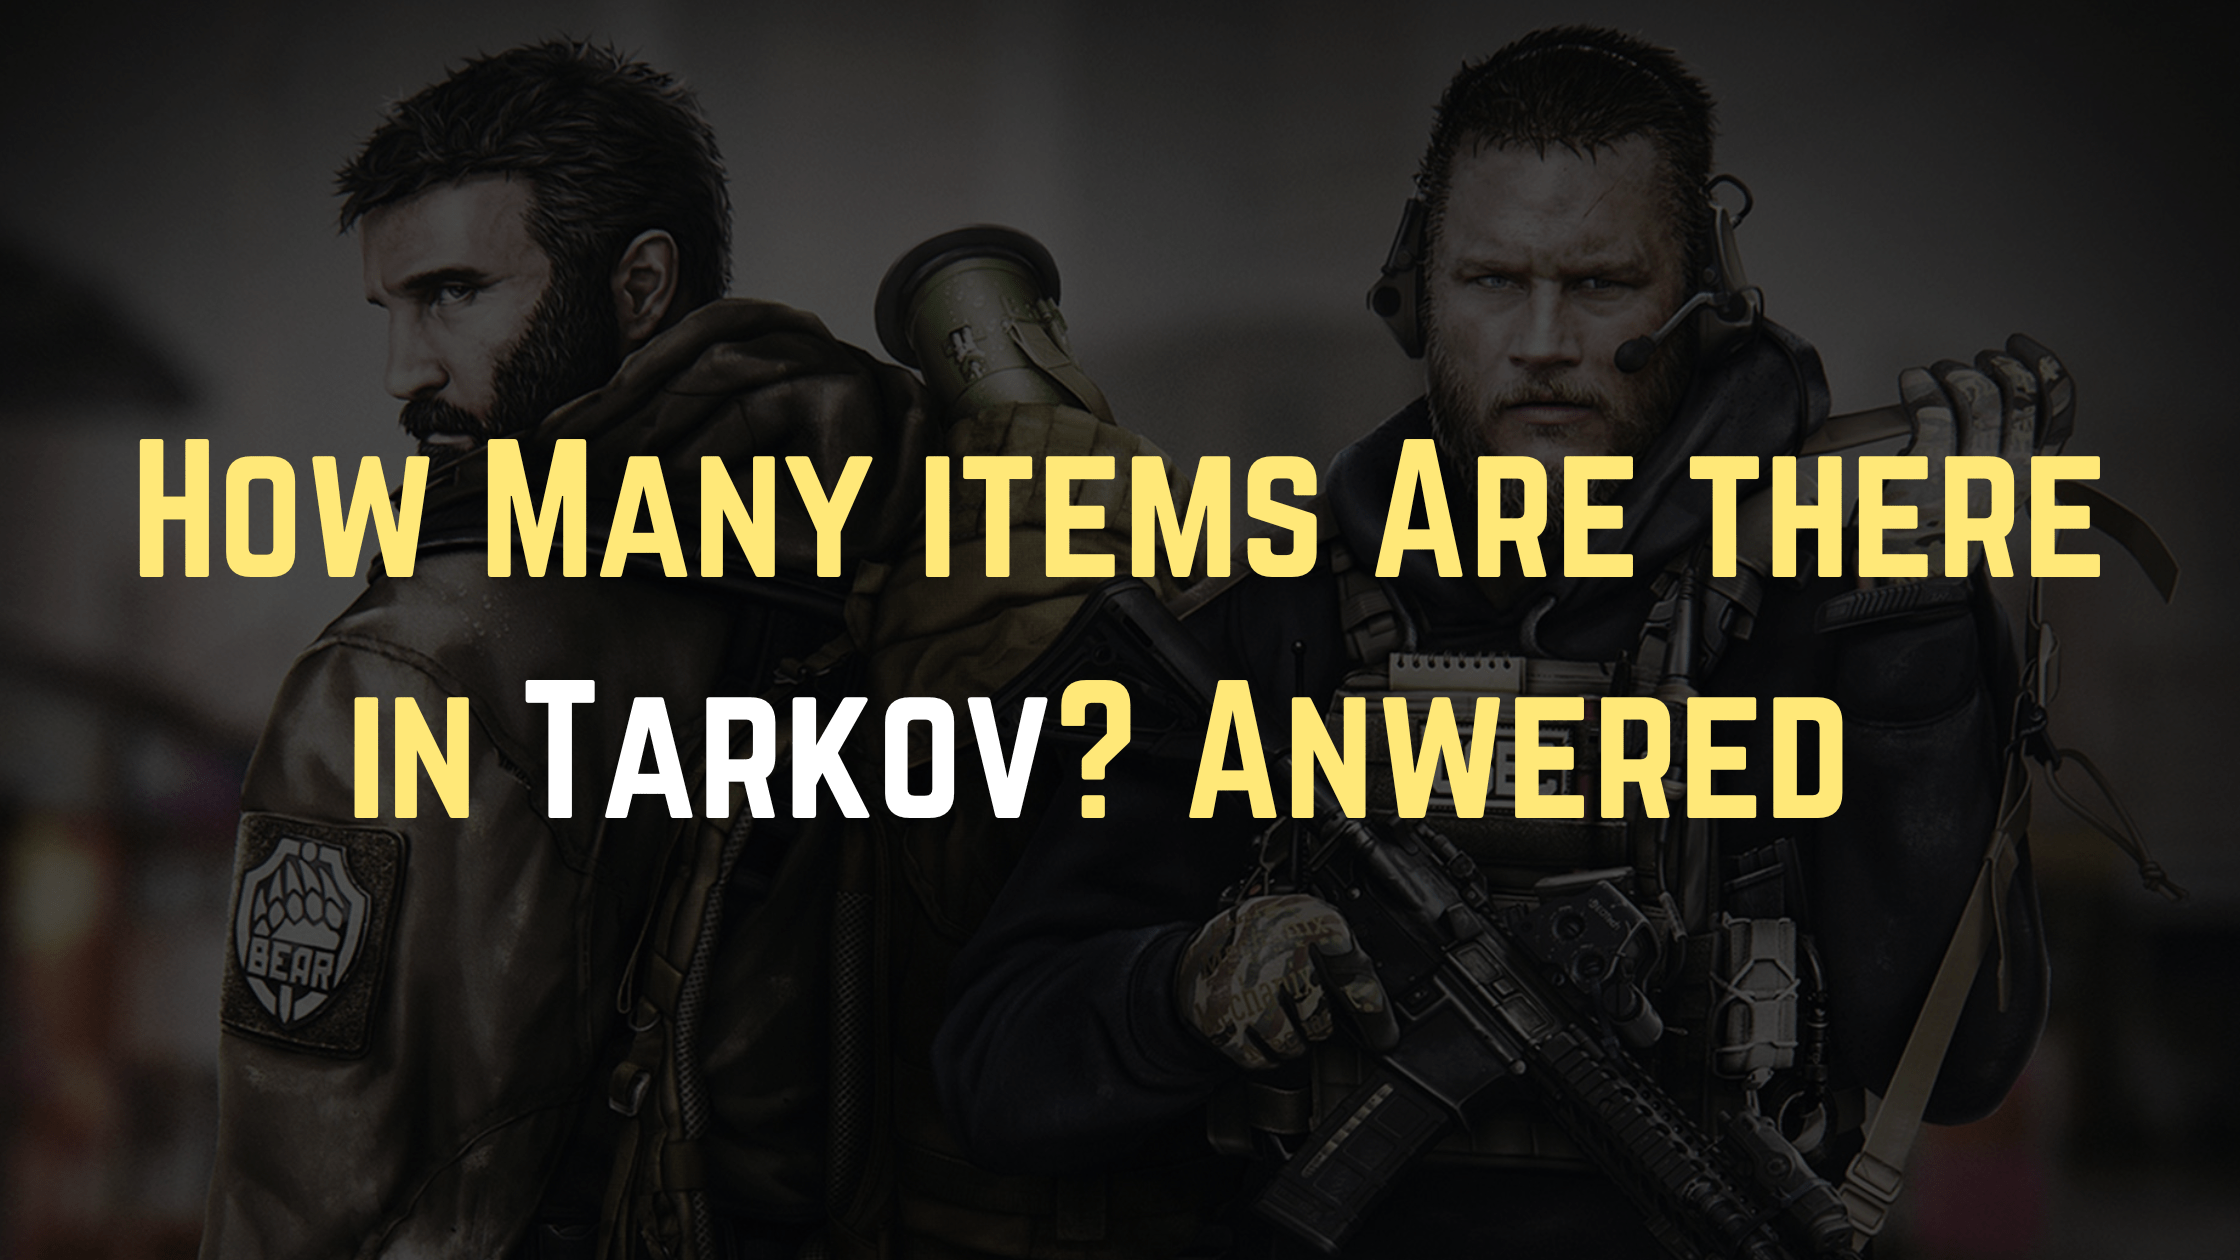 How Many items Are there in Tarkov